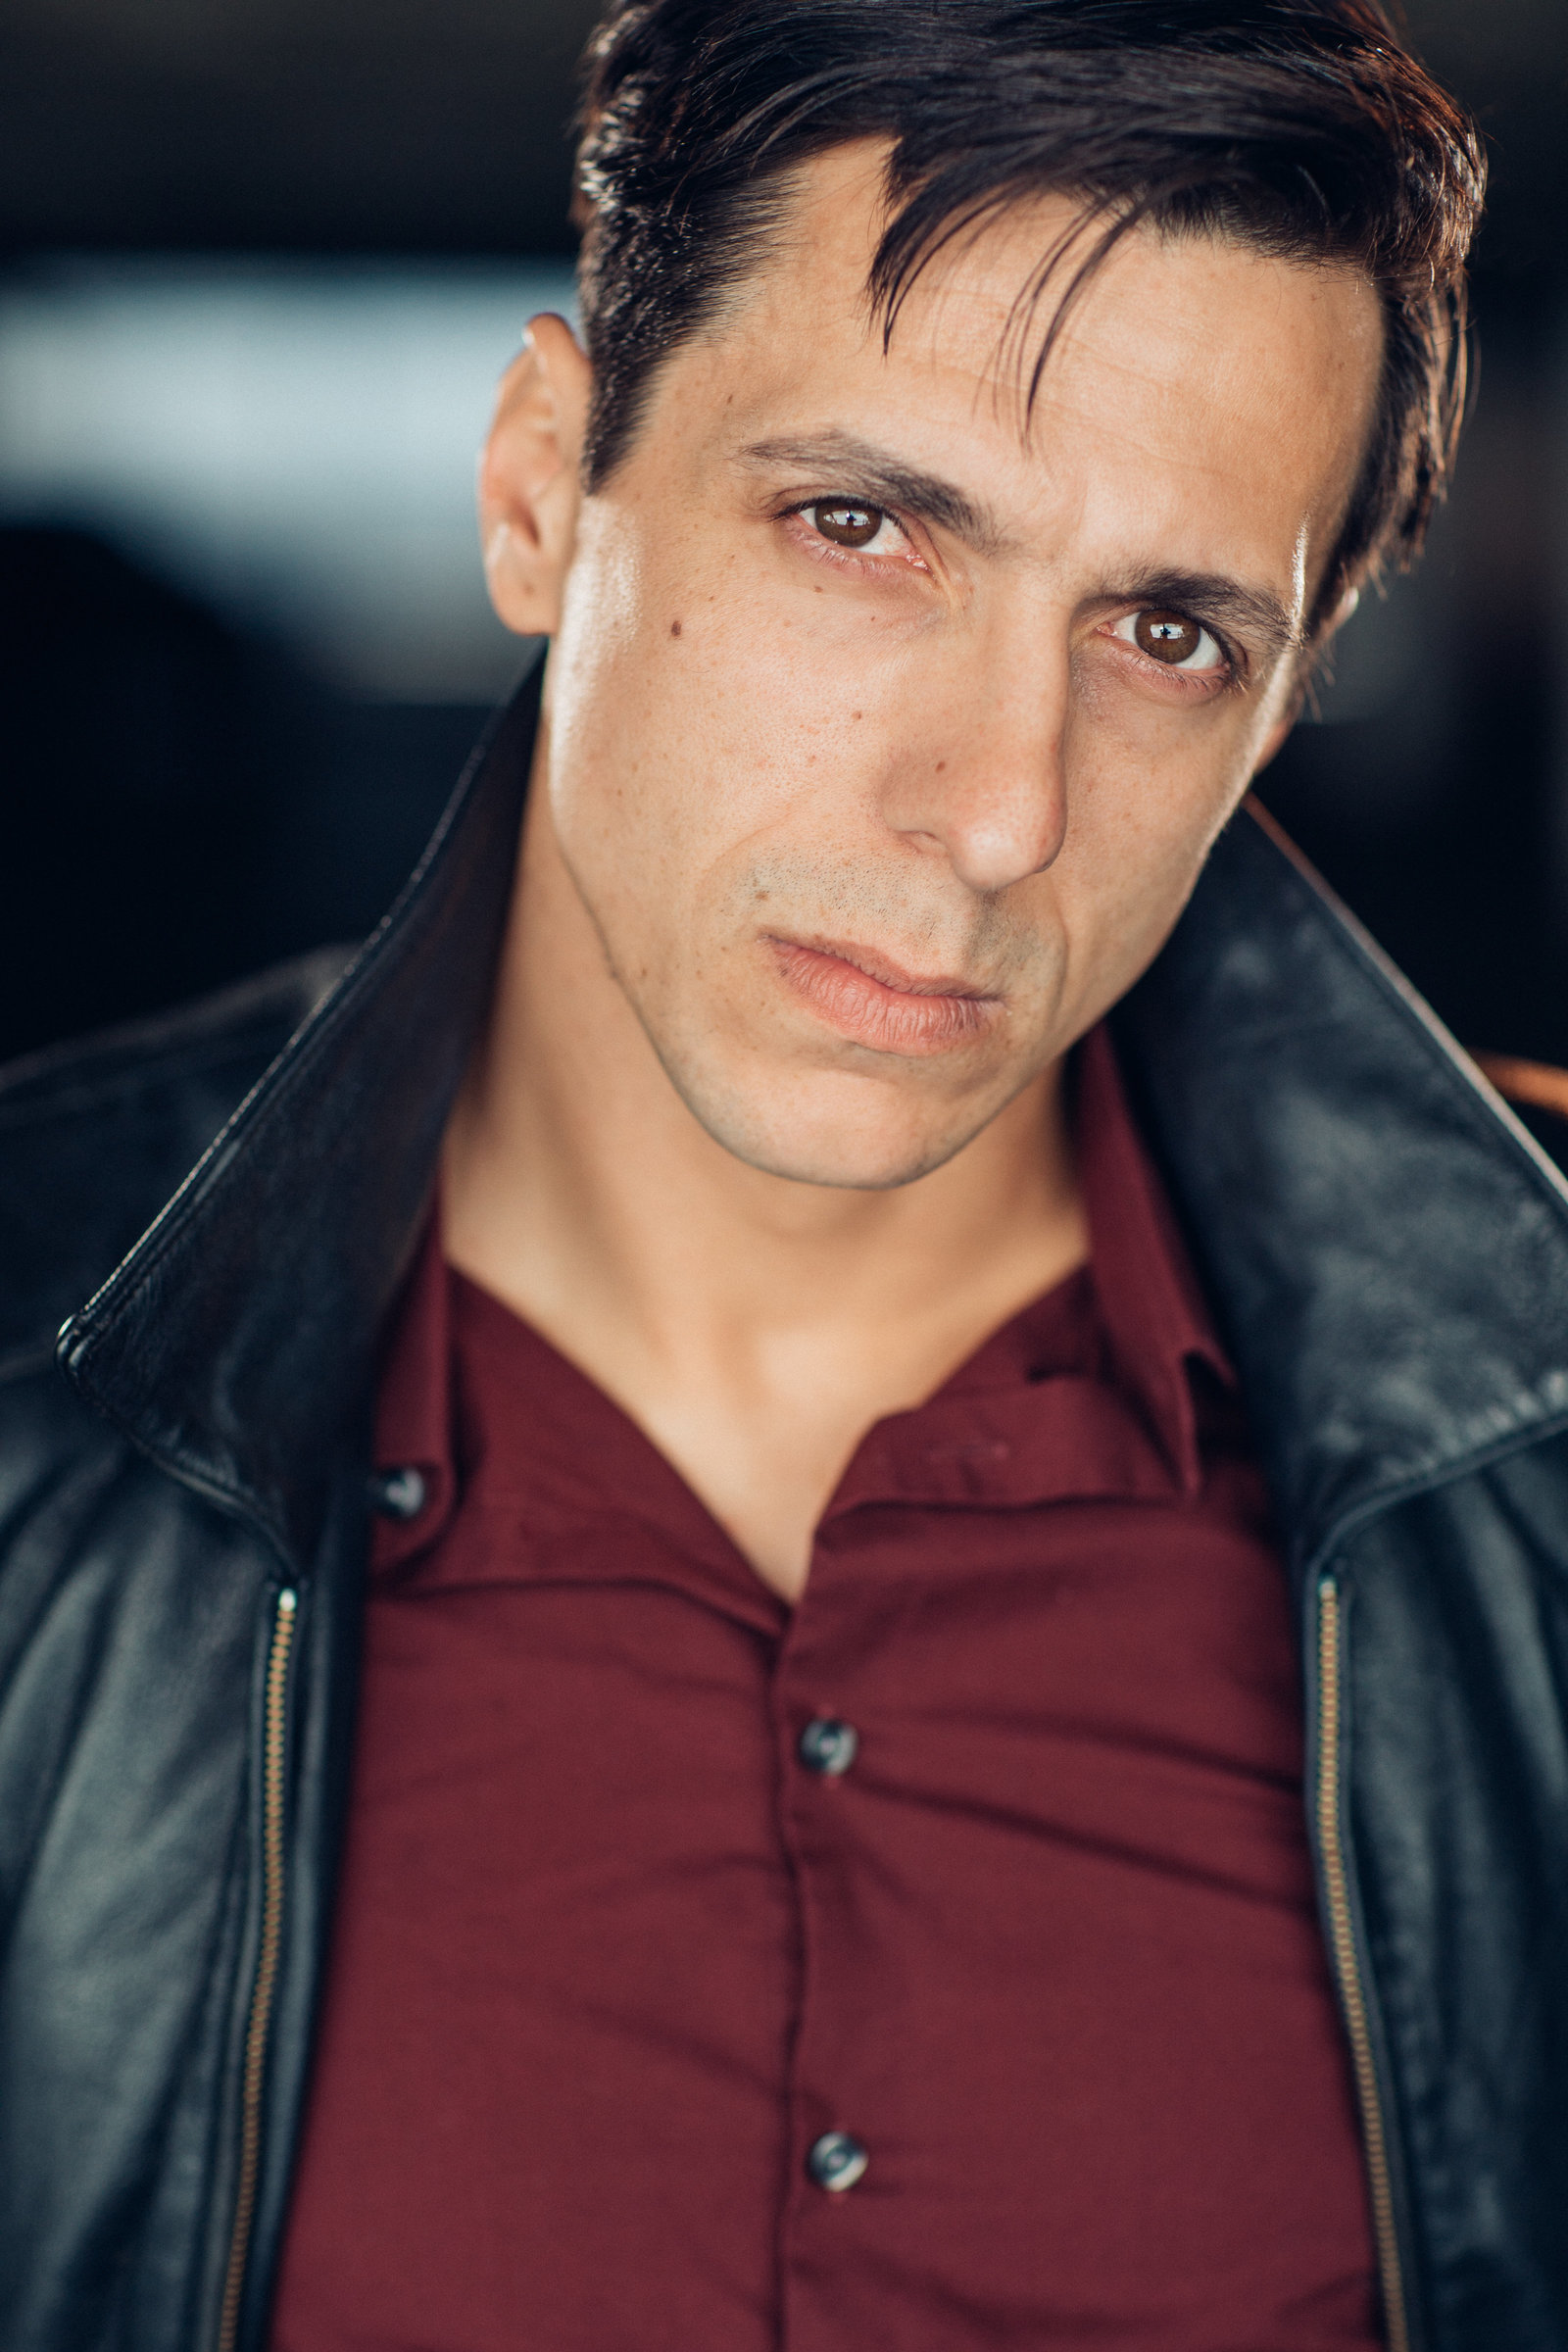 Headshot Photograph Of Man In Leather Jacket And Maroon polo Los Angeles